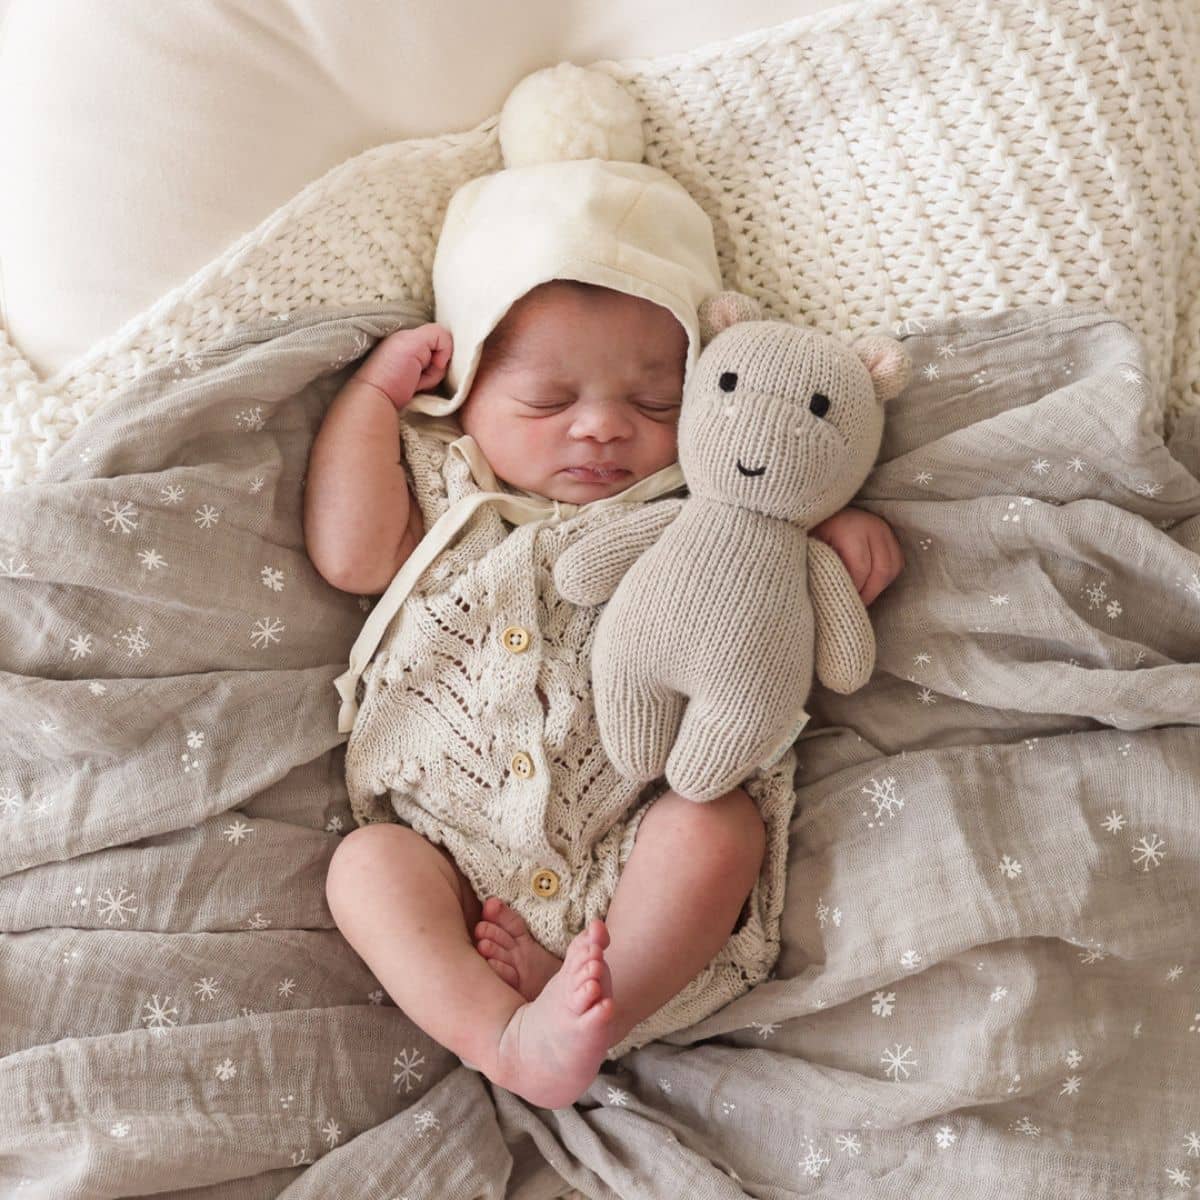 Cuddle + Kind Hand-Knit Doll - Baby Hippo (pebble)